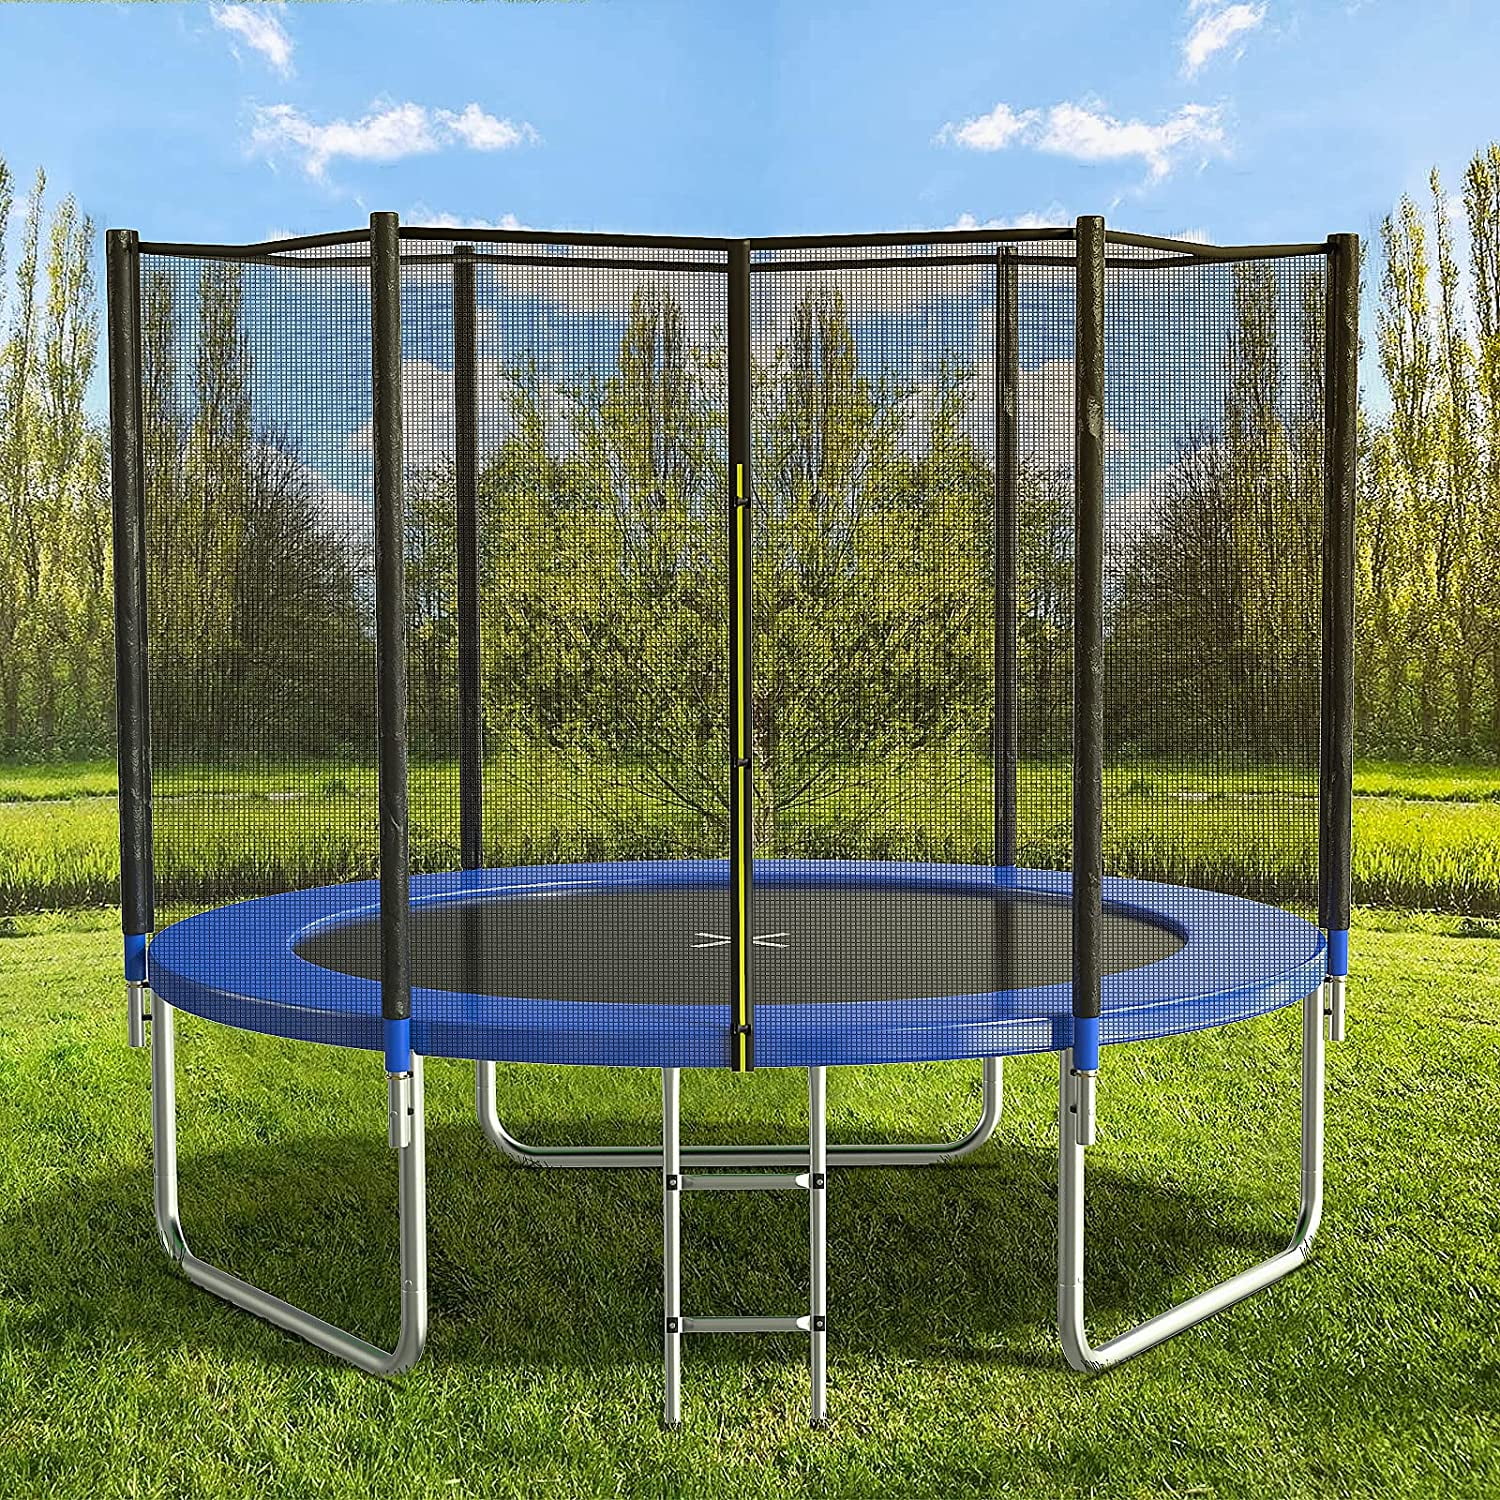 AOTOB 8ft Trampoline for Kids/Adults, Trampoline with Safety Net, Blue - Walmart.com